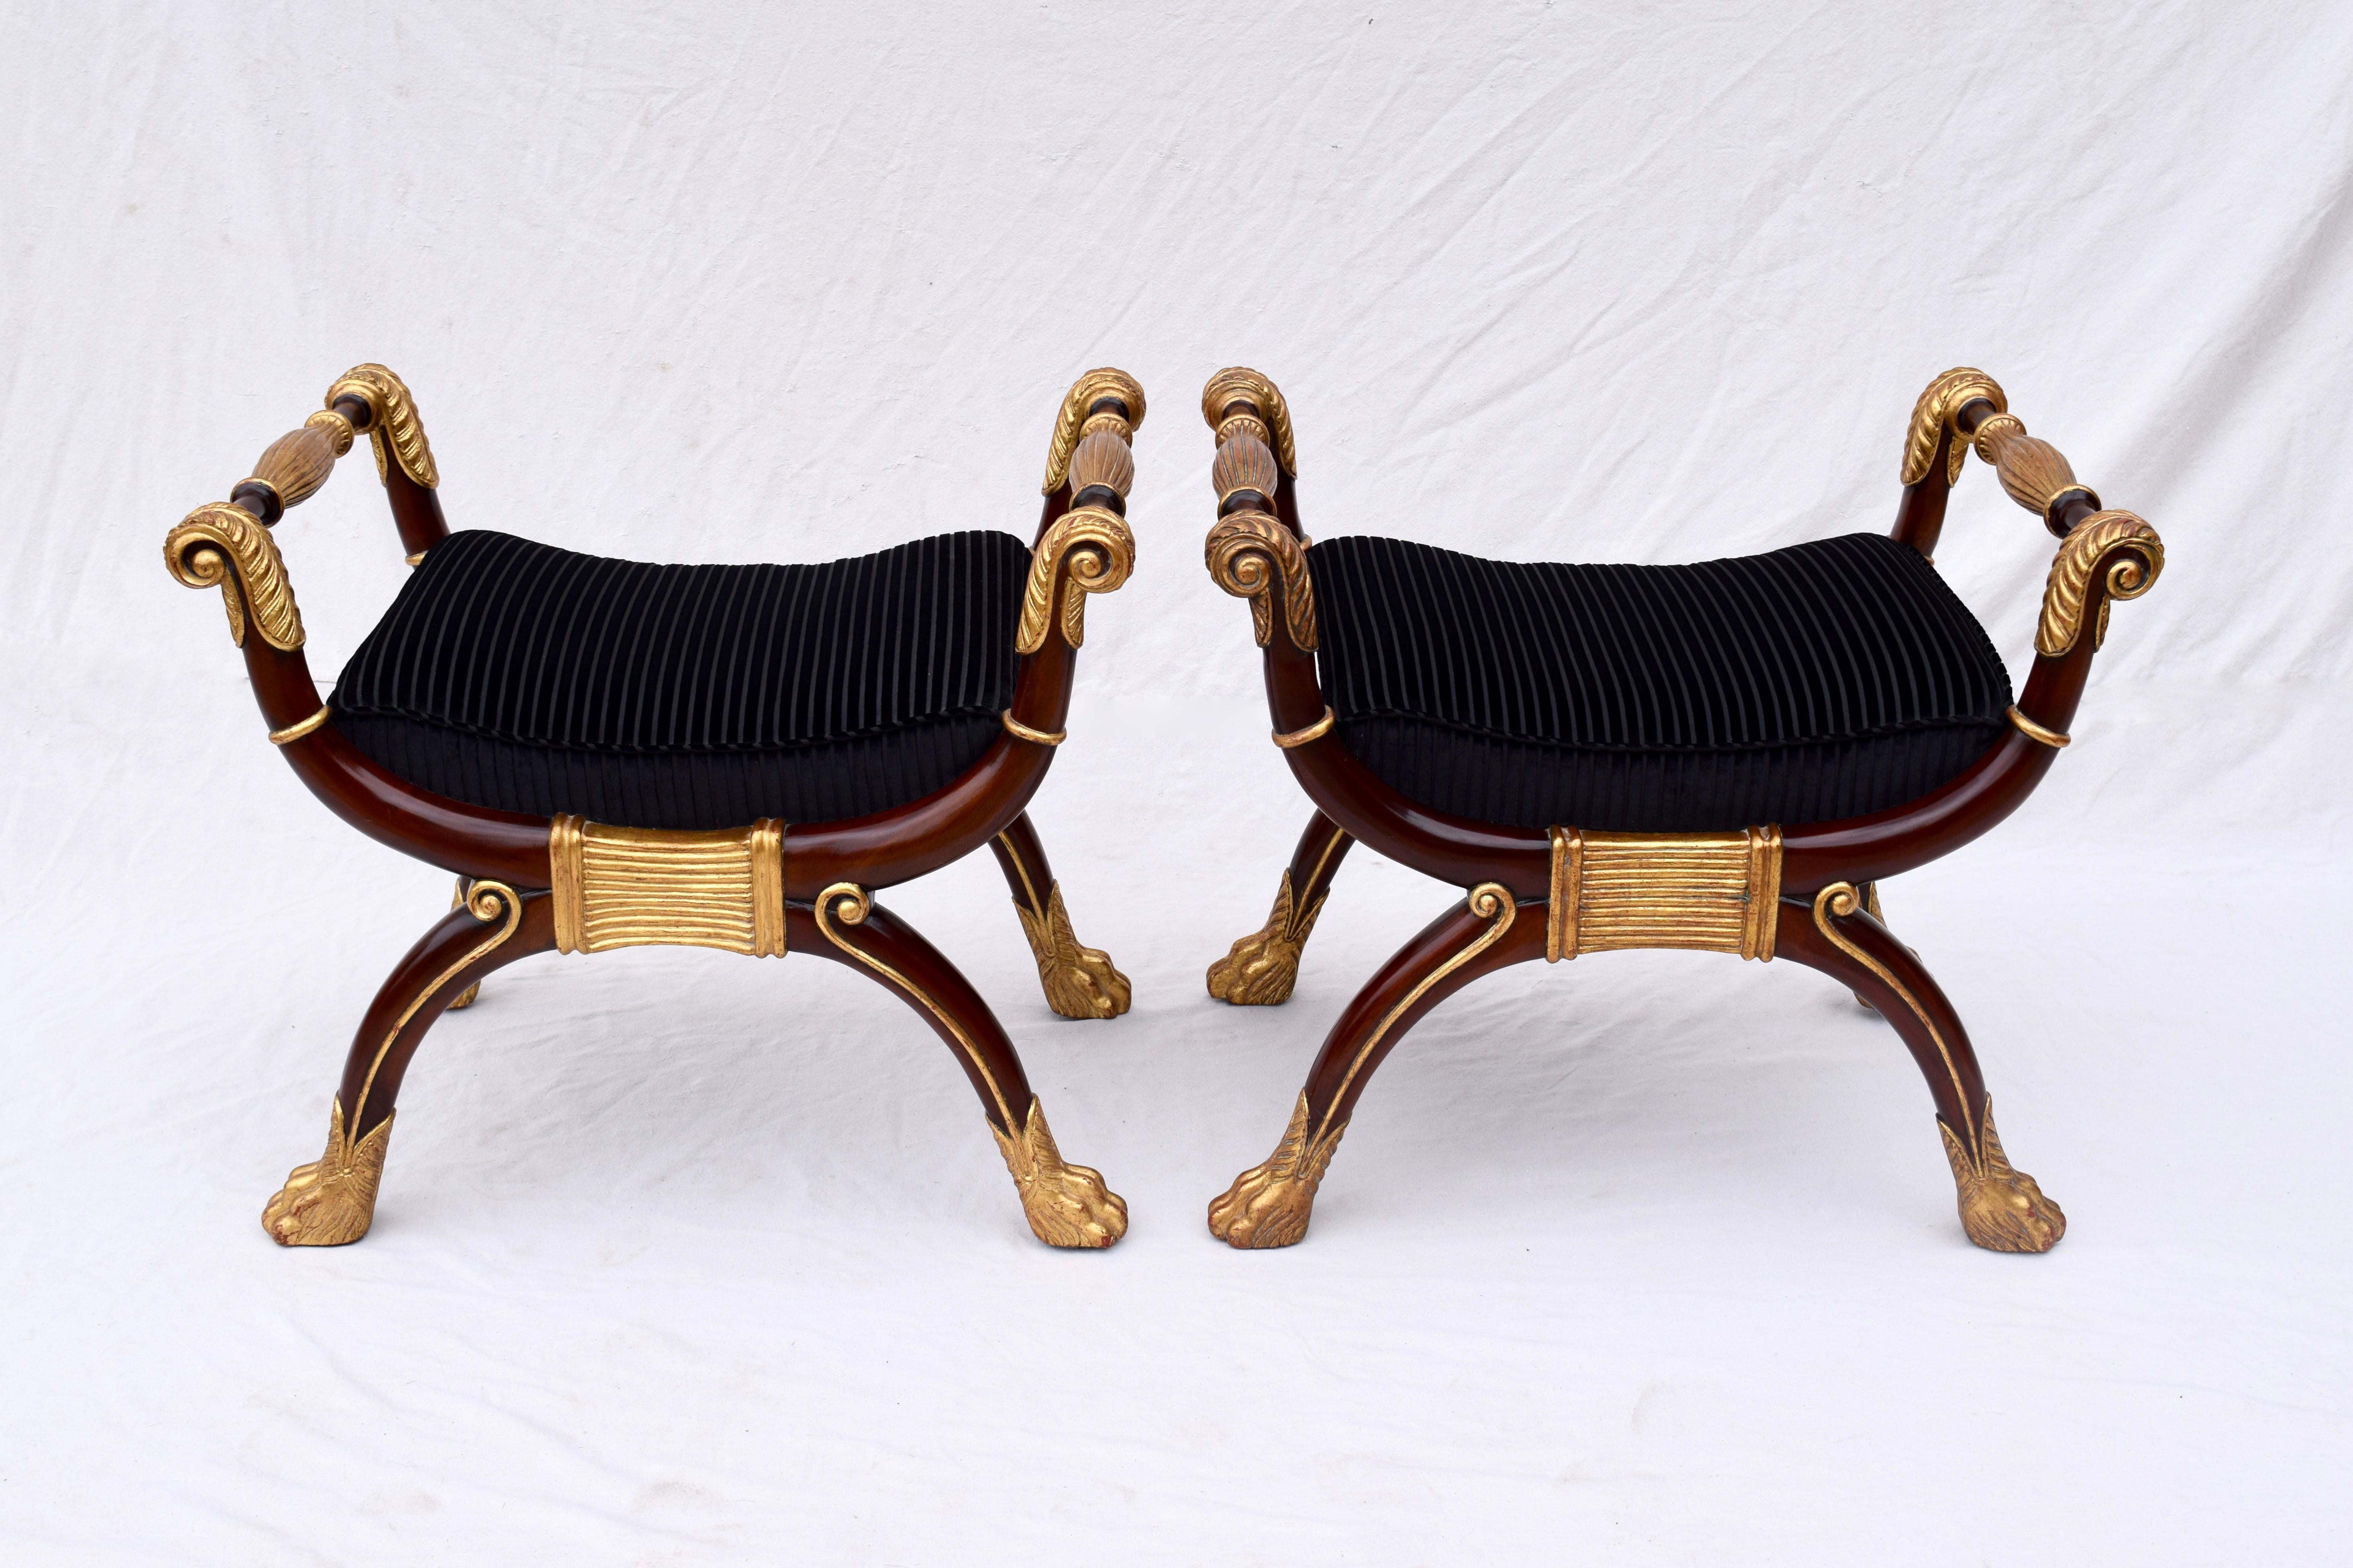 A striking pair of Maitland Smith mahogany and gold gilt benches with carved scroll arms, newly upholstered striped velvet seats and curule, claw foot bases.
Measures: Seat height 19.5